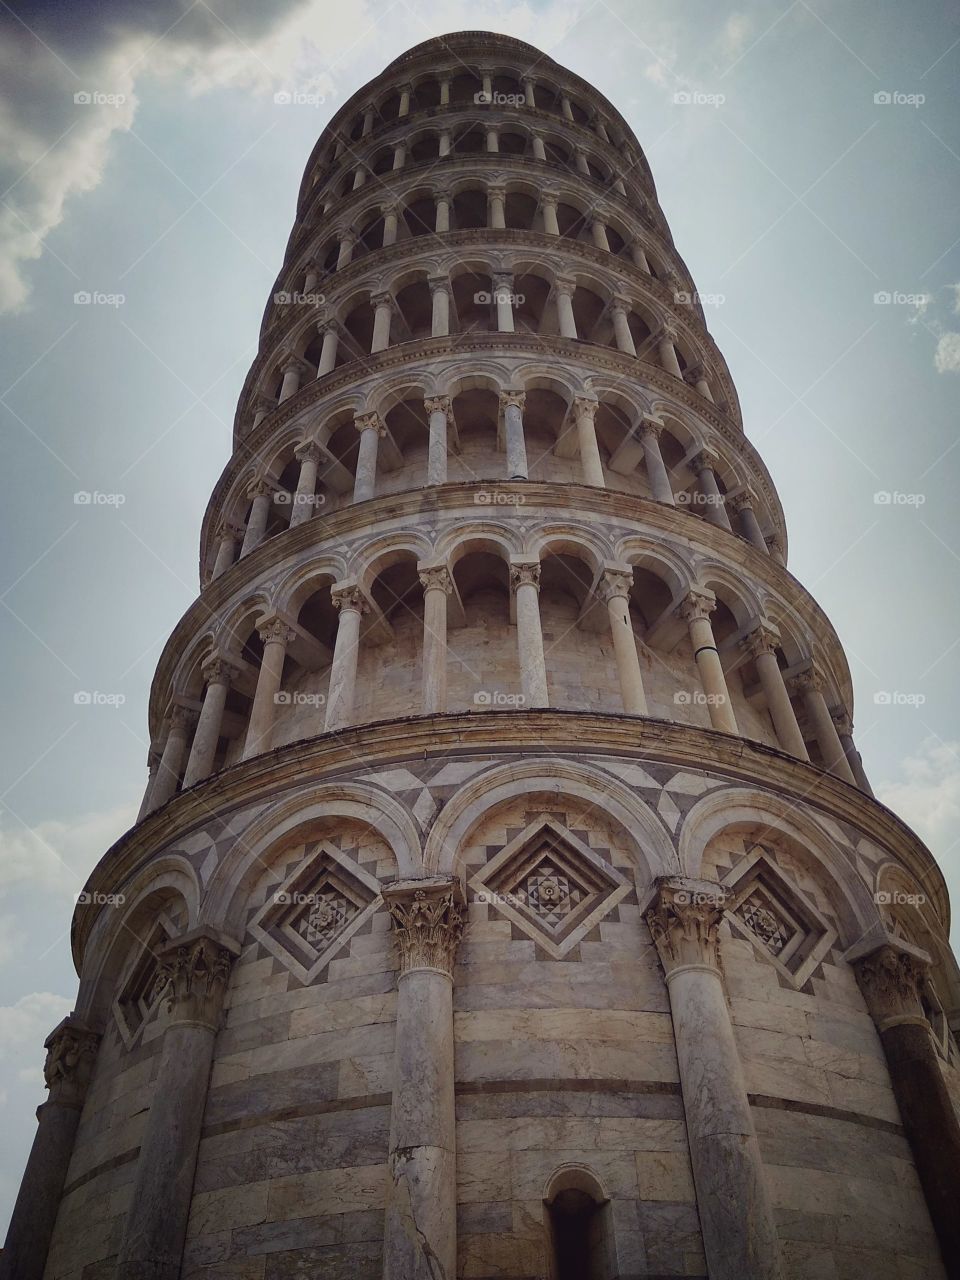 Pisa is not leaning anymore